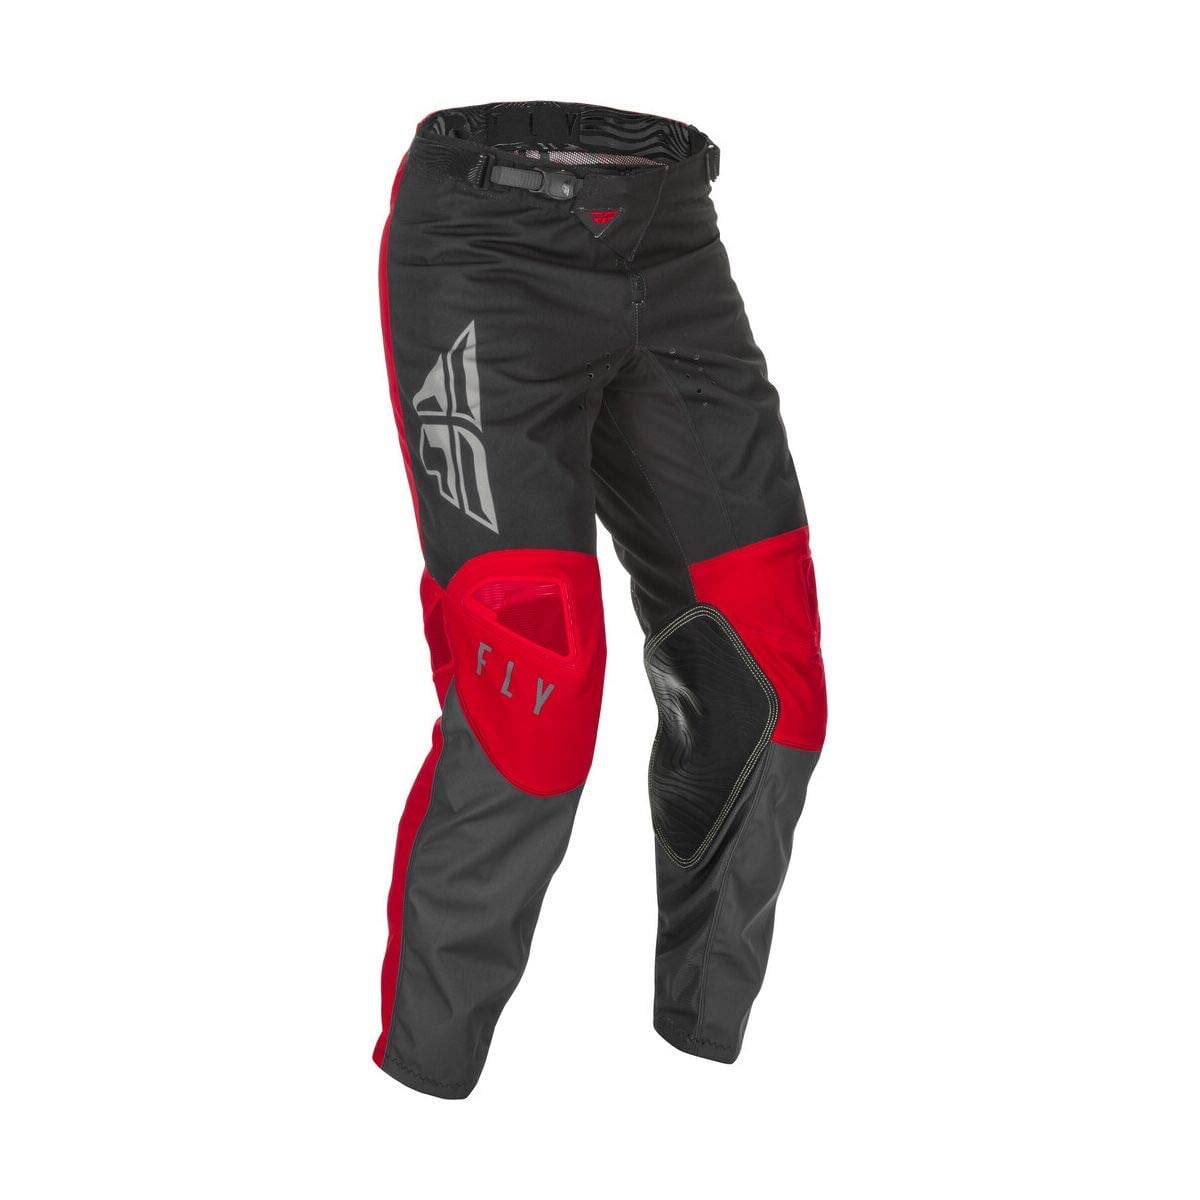 Details about   2021 Fly Racing Kinetic K121 Mustard/Stone/Grey Motocross Gear Combination 